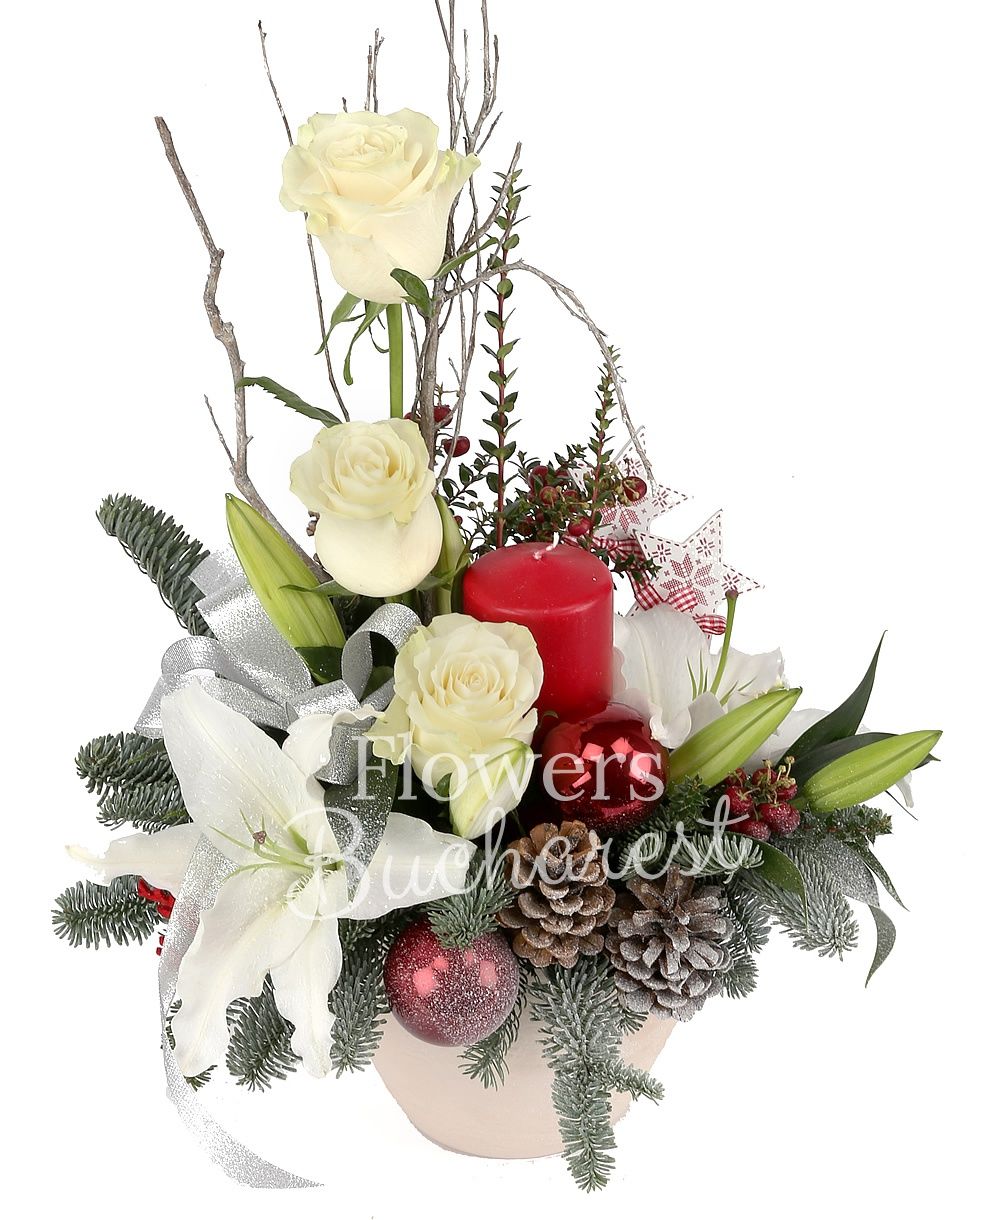 1 white lily, 3 white roses, 2 red hypericum, cones, globes, candle, greenery